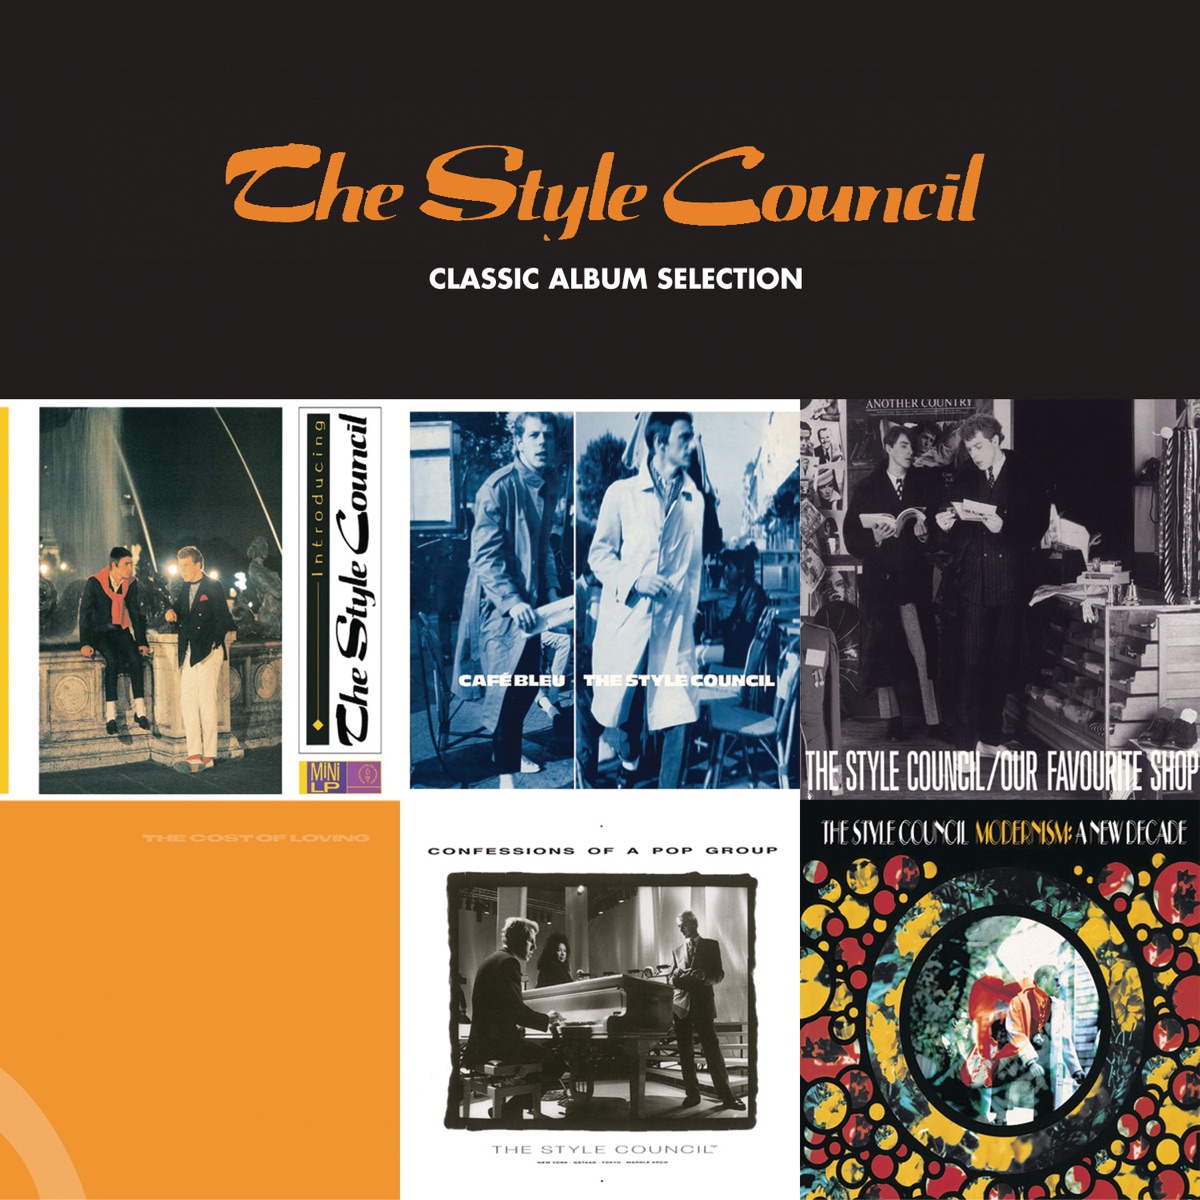 Our Favourite Shop by The Style Council on Apple Music